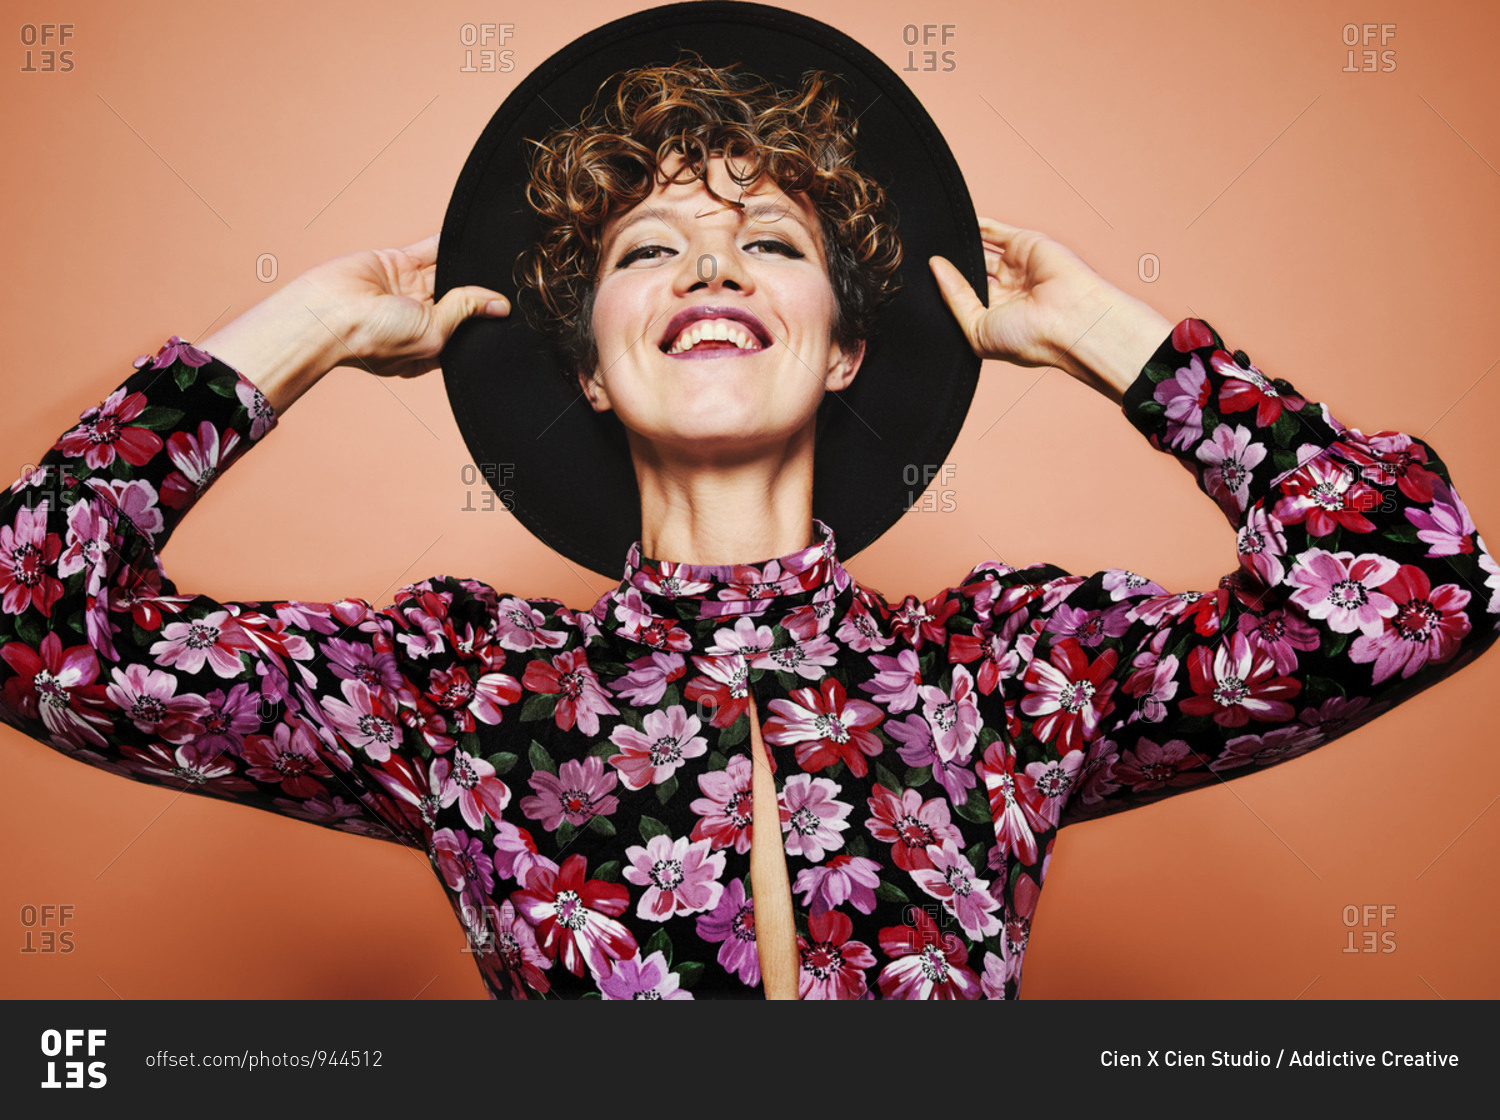 Optimistic young beautiful female model with curly hair wearing stylish black hat and colorful blouse looking at camera and smiling while standing against orange background